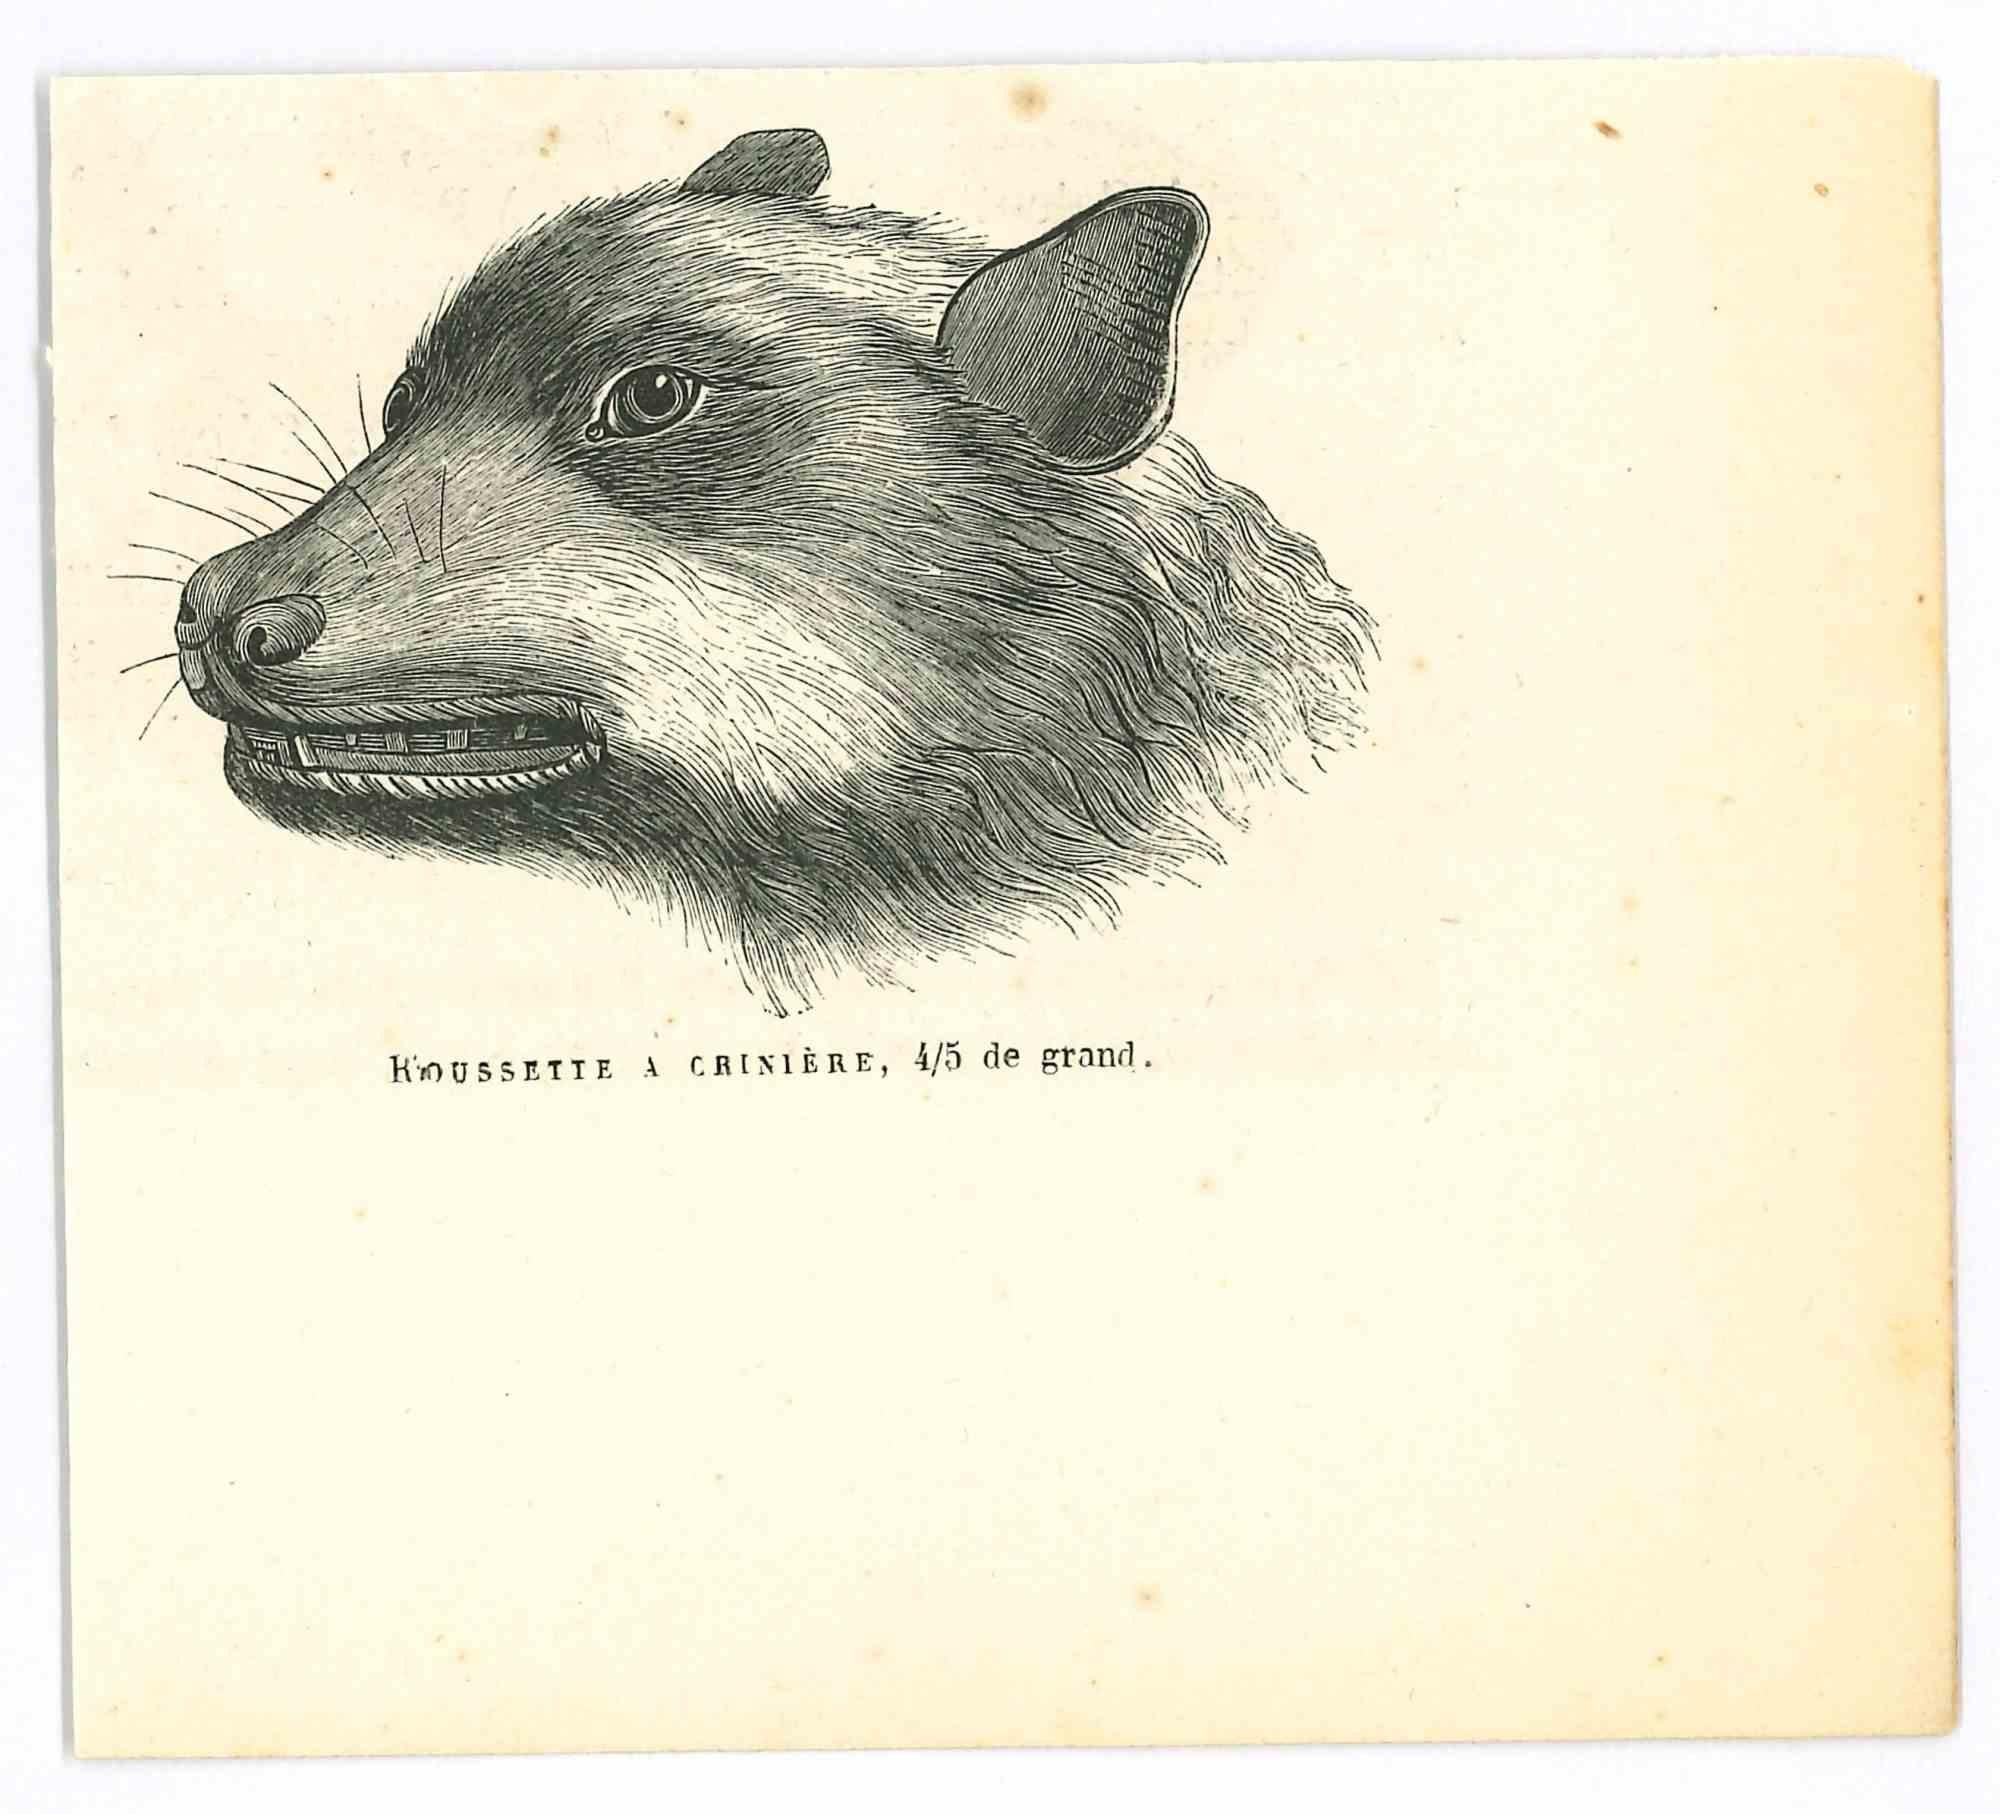 The Dog - Lithograph by Paul Gervais - 1854